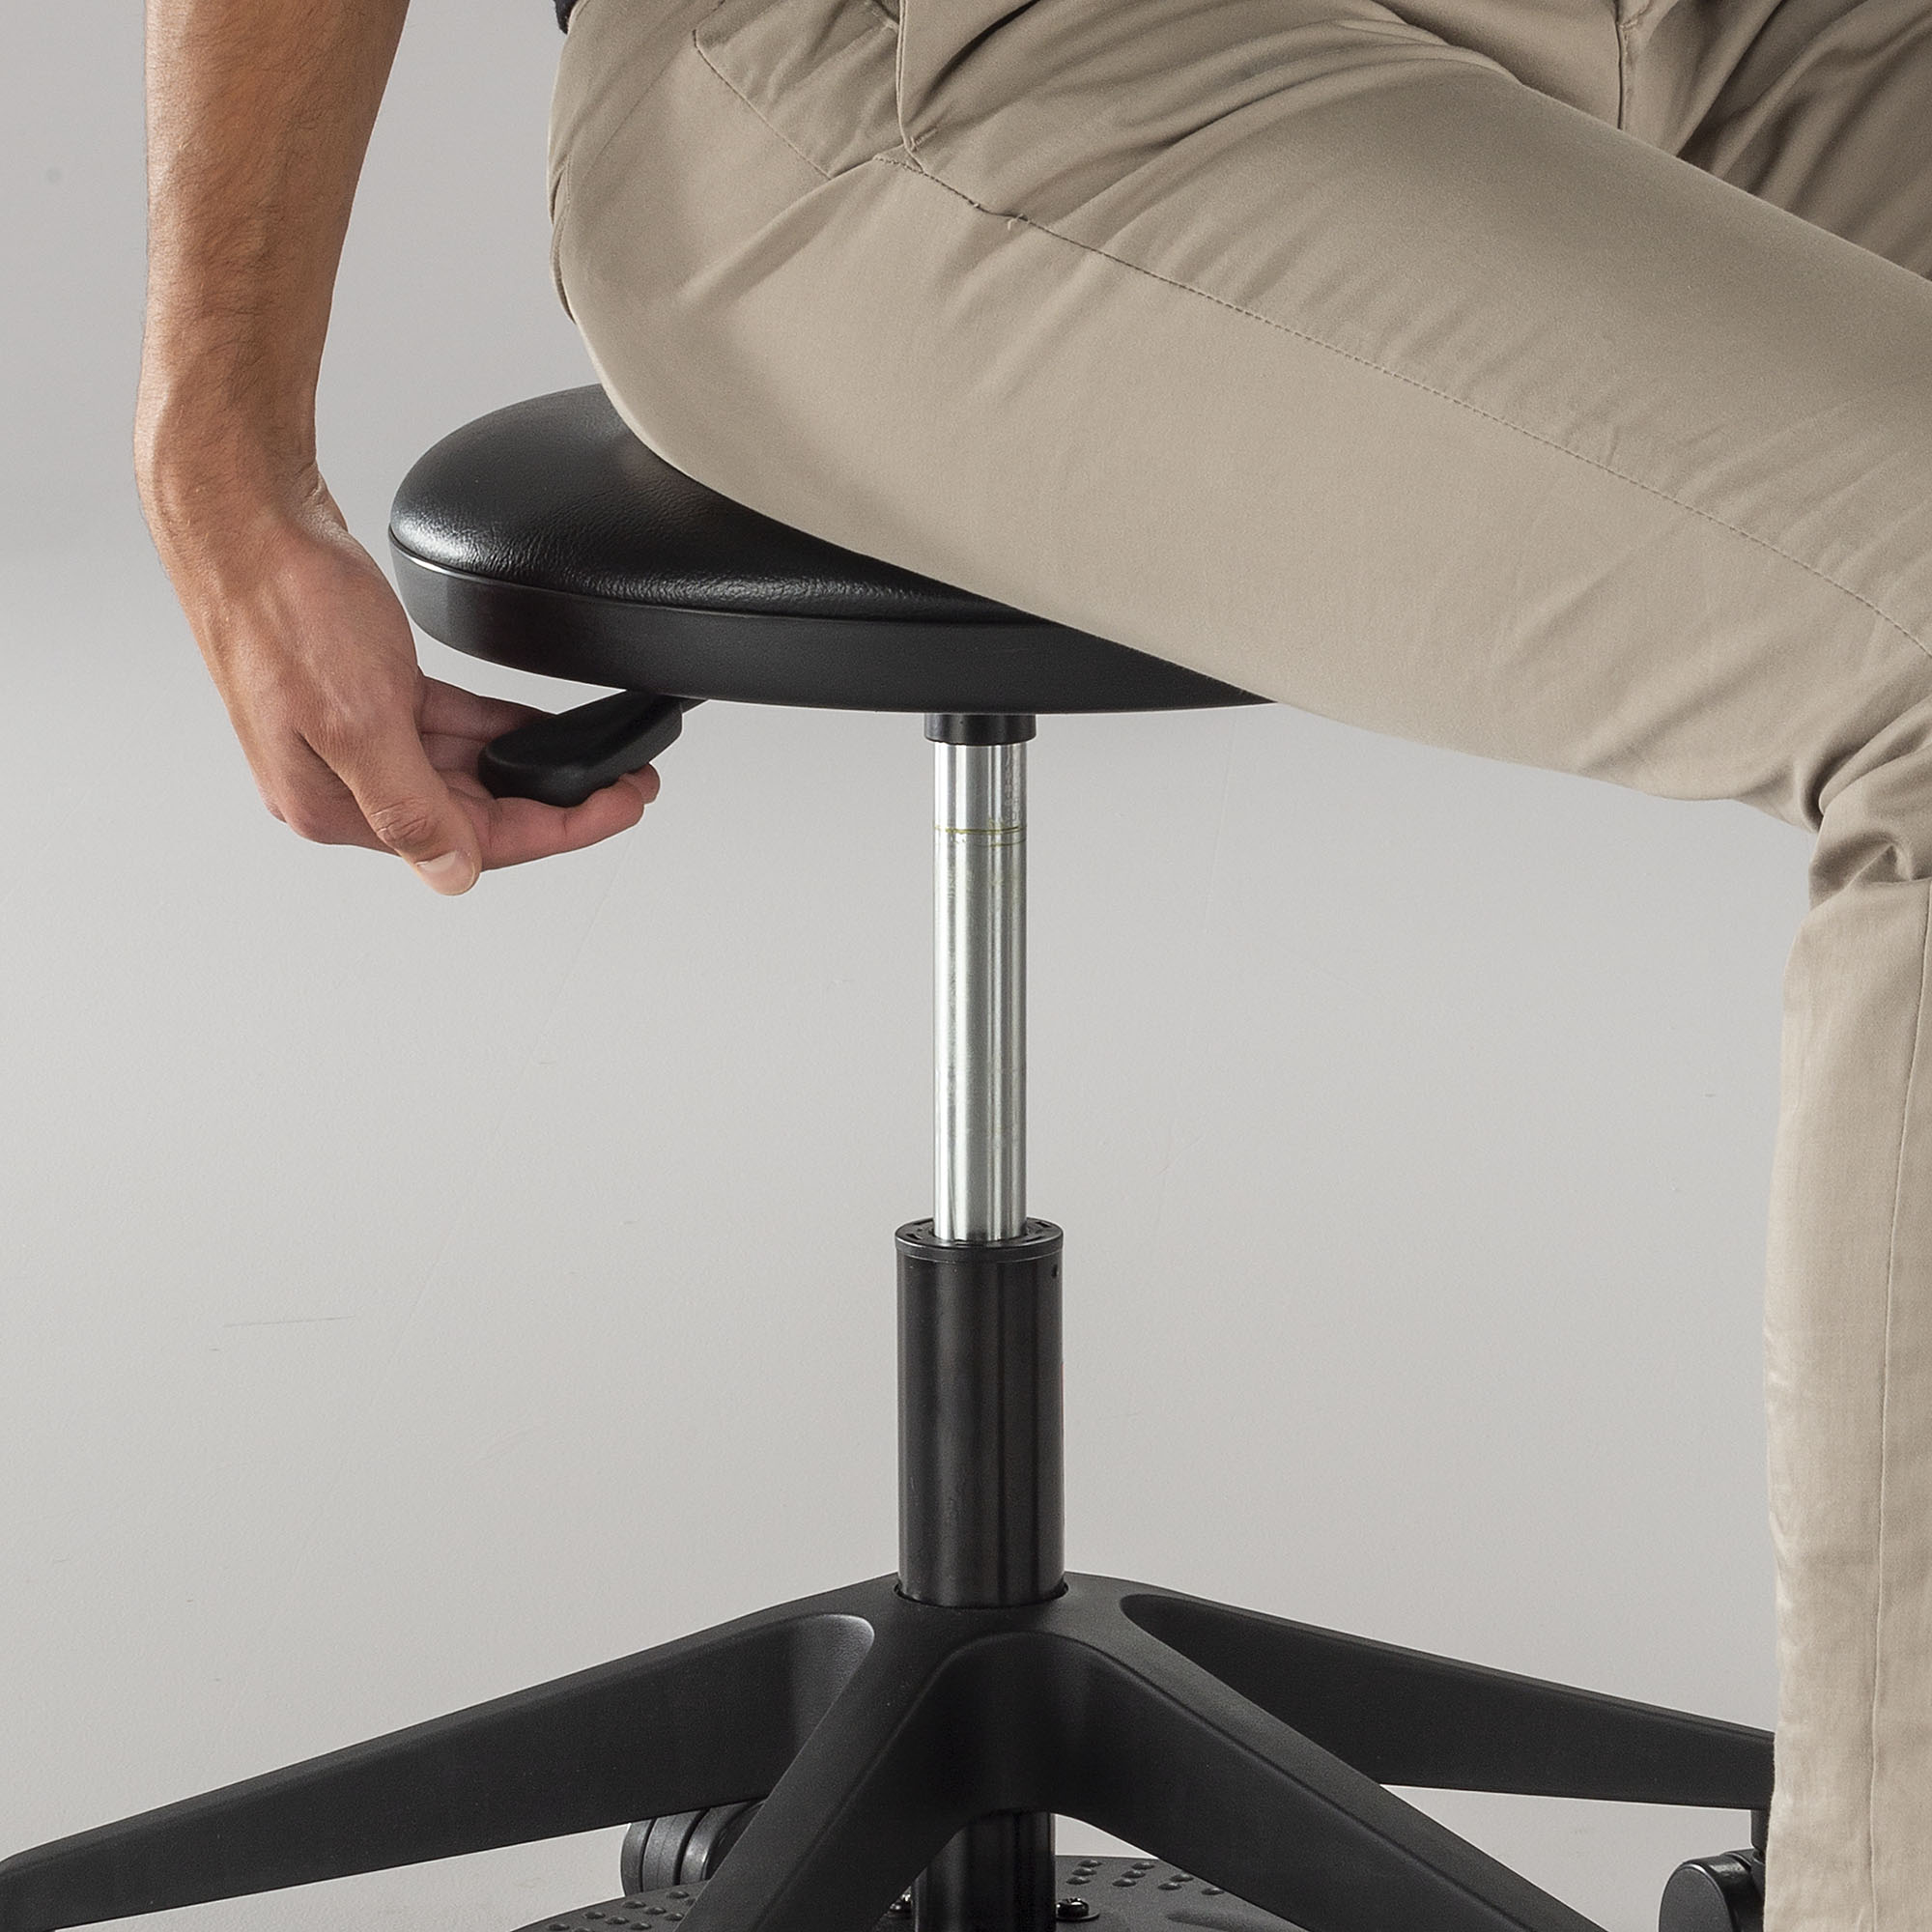 Foot Pedal Lab Stool | Safco Products